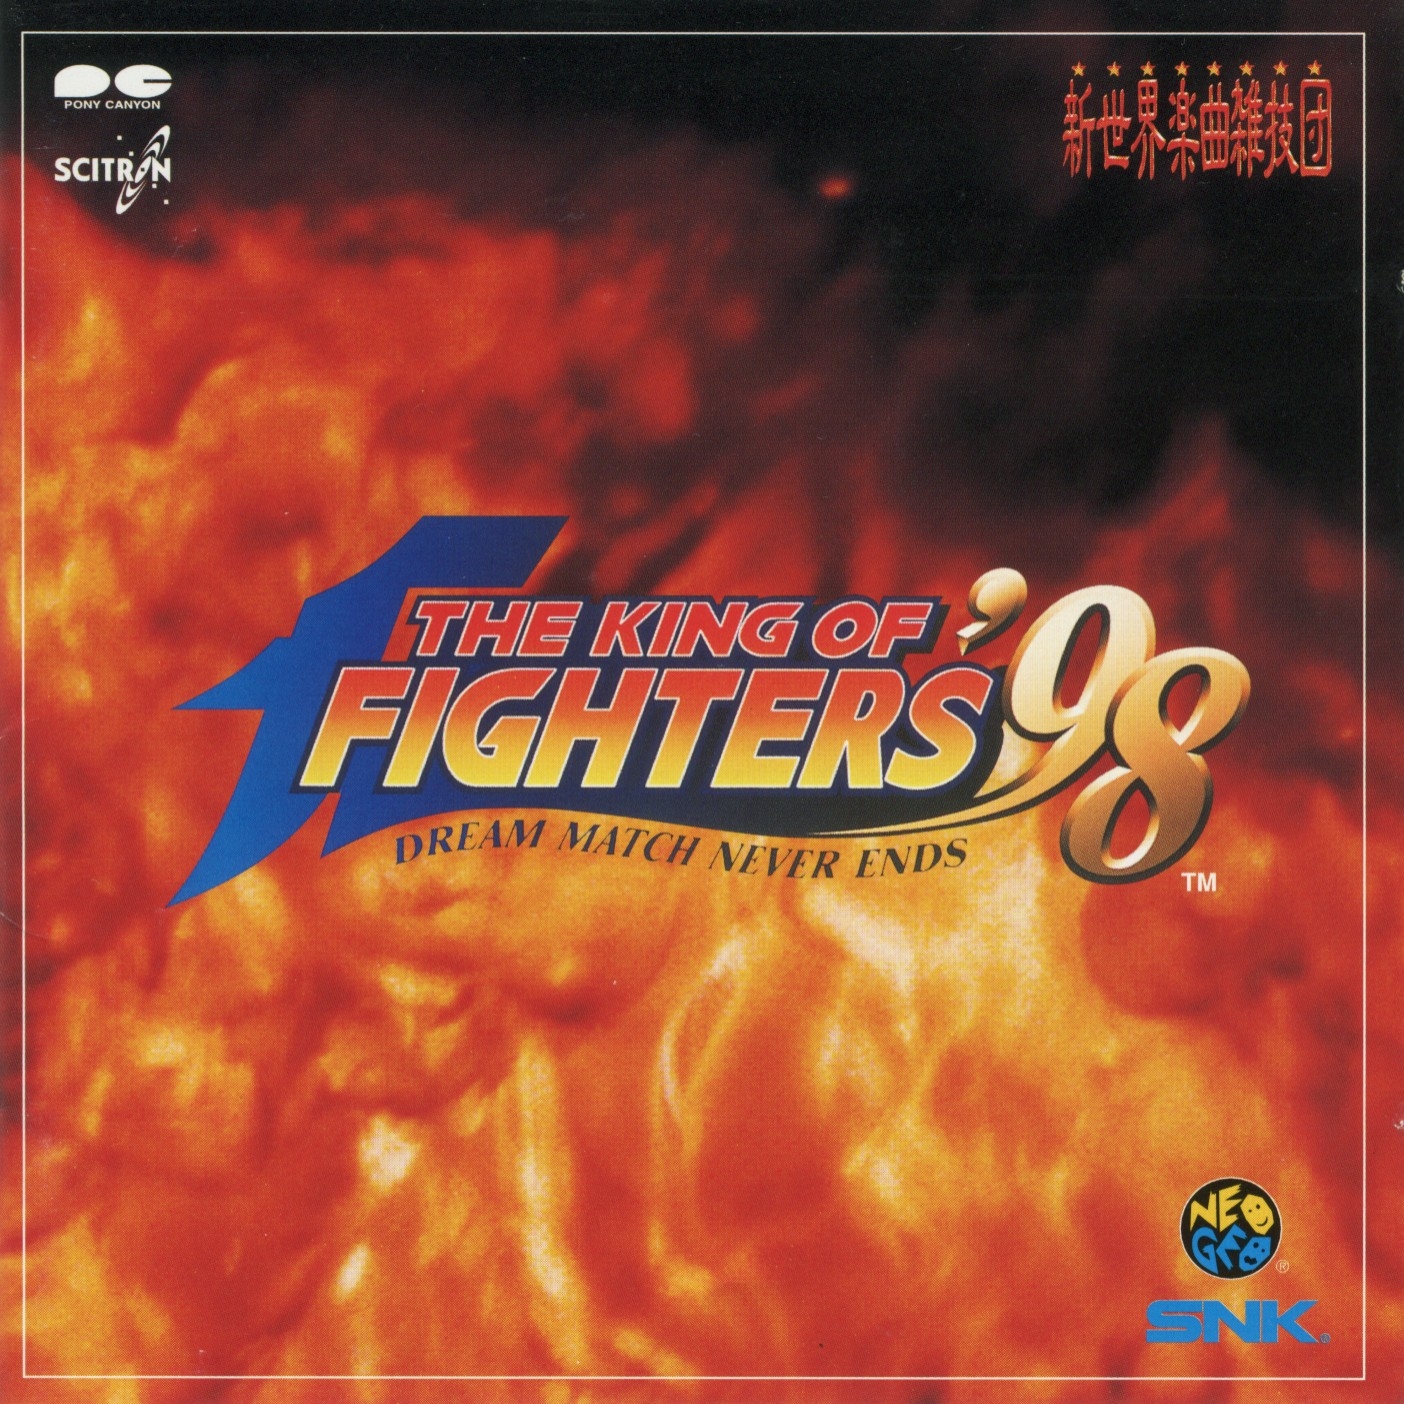 THE KING OF FIGHTERS '98 (1998) MP3 - Download THE KING OF 